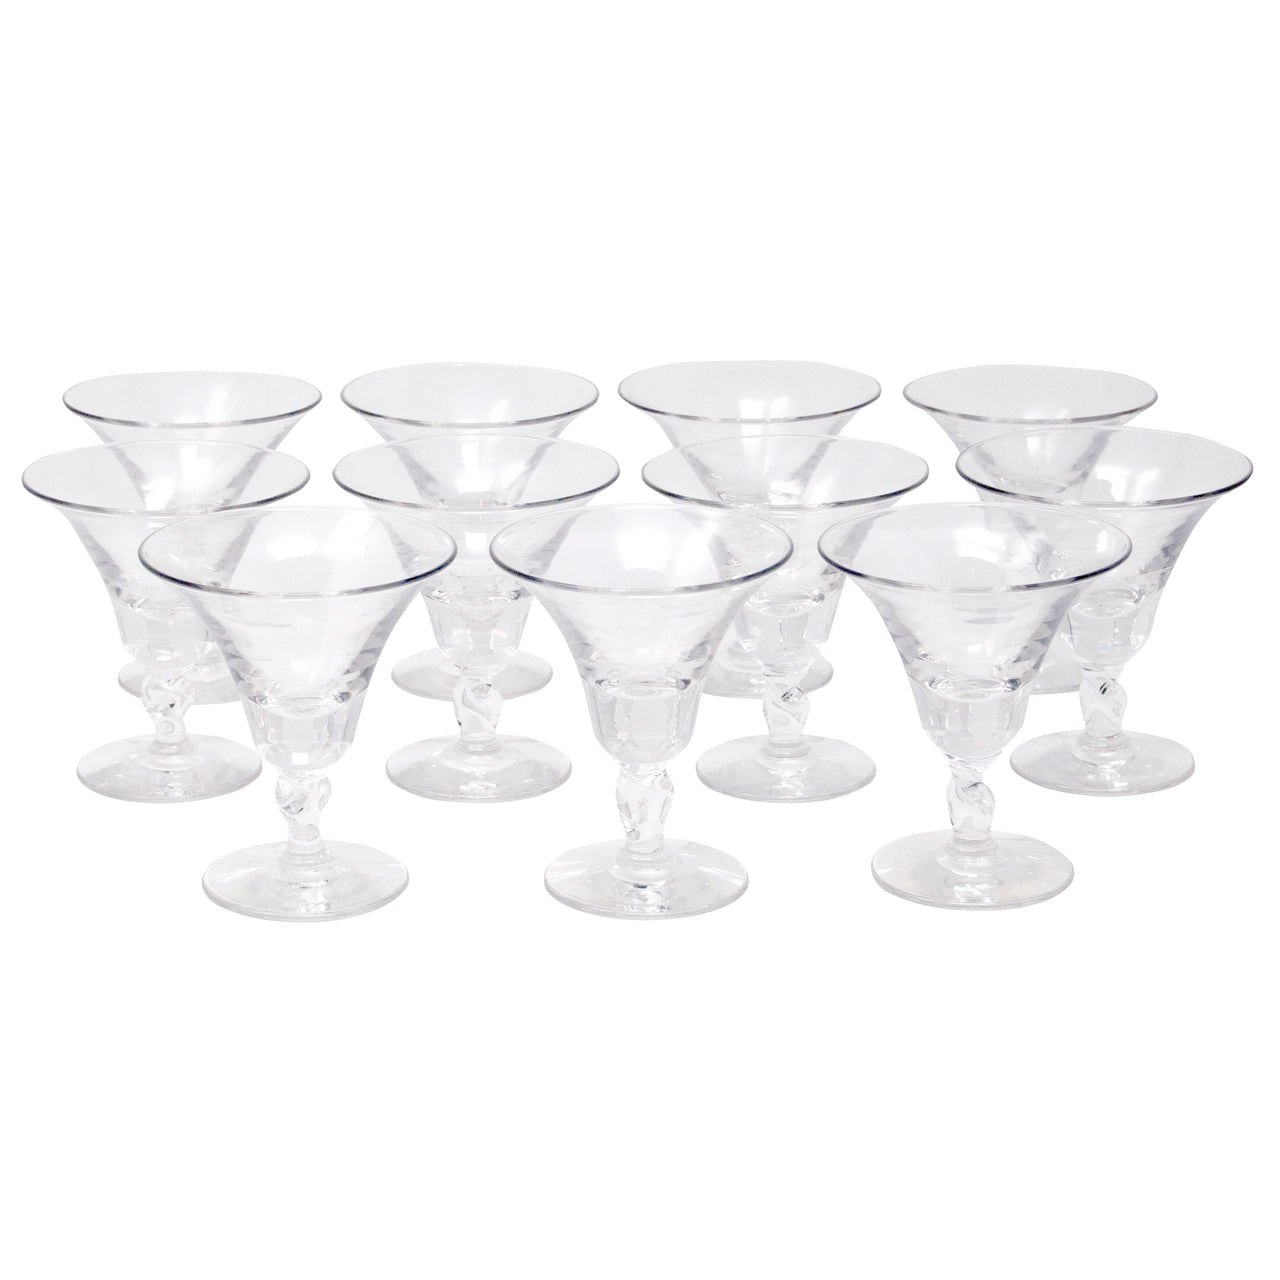 Vintage Small Wine Glasses, Set of 4, Twisted Clear Stems, Wine